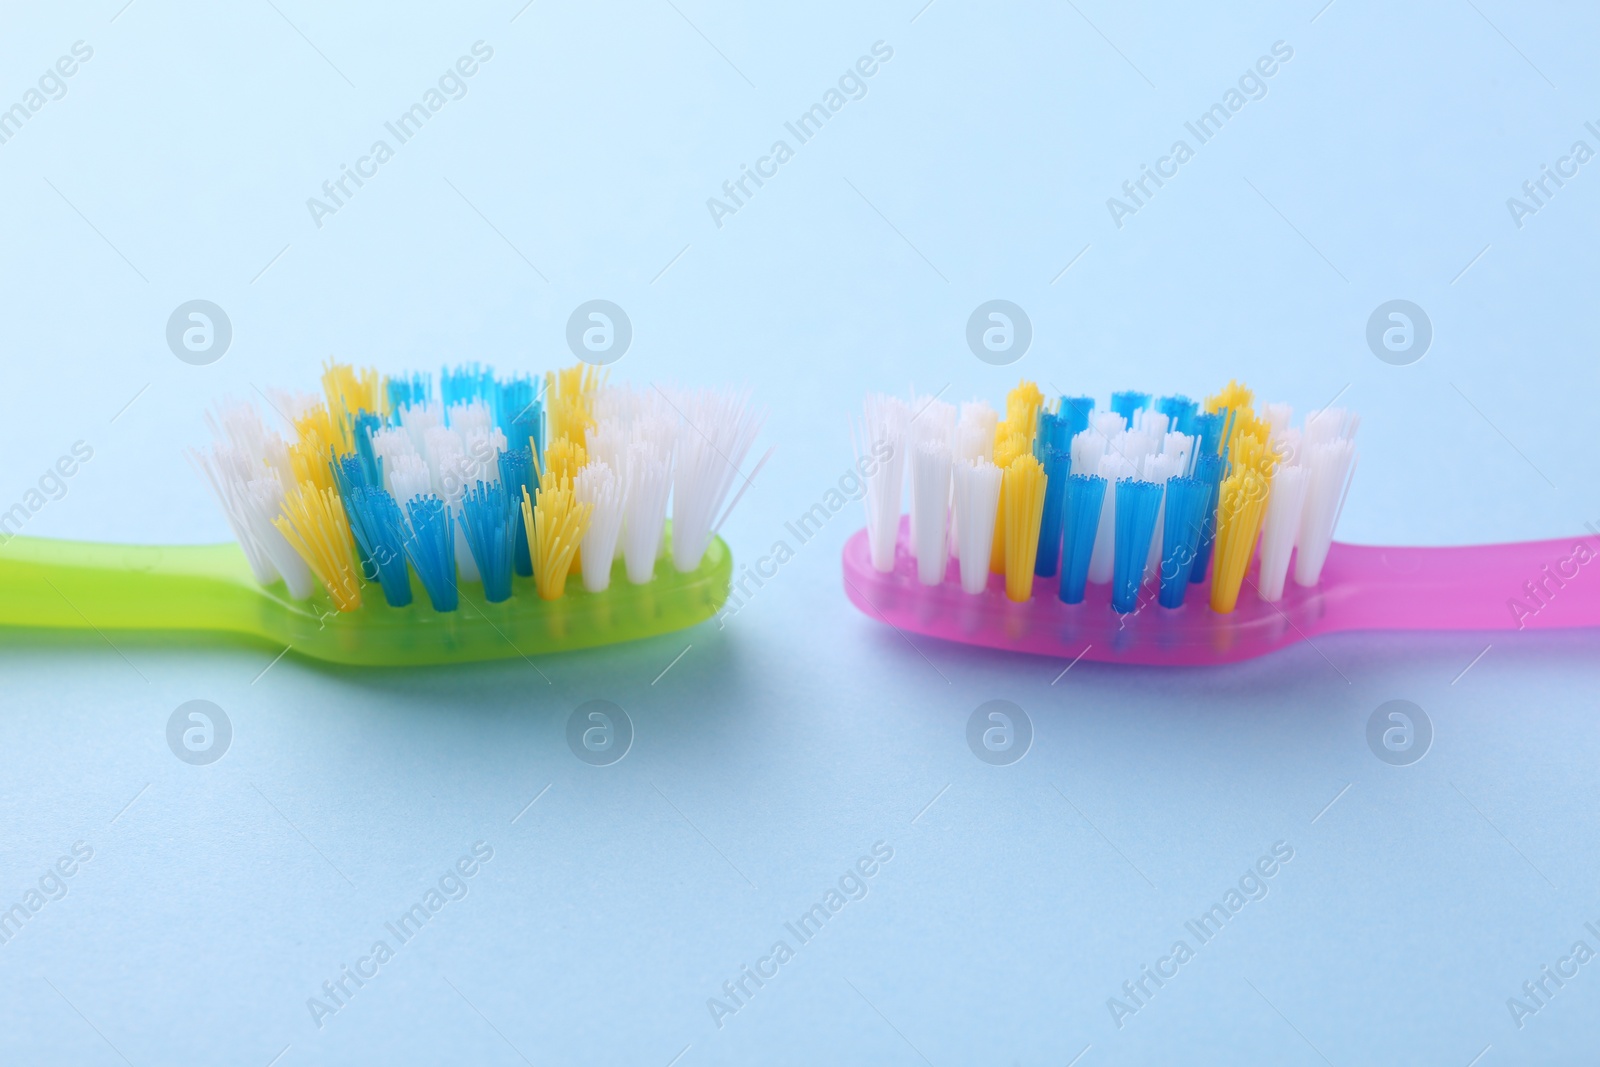 Photo of Colorful plastic toothbrushes on light blue background, closeup